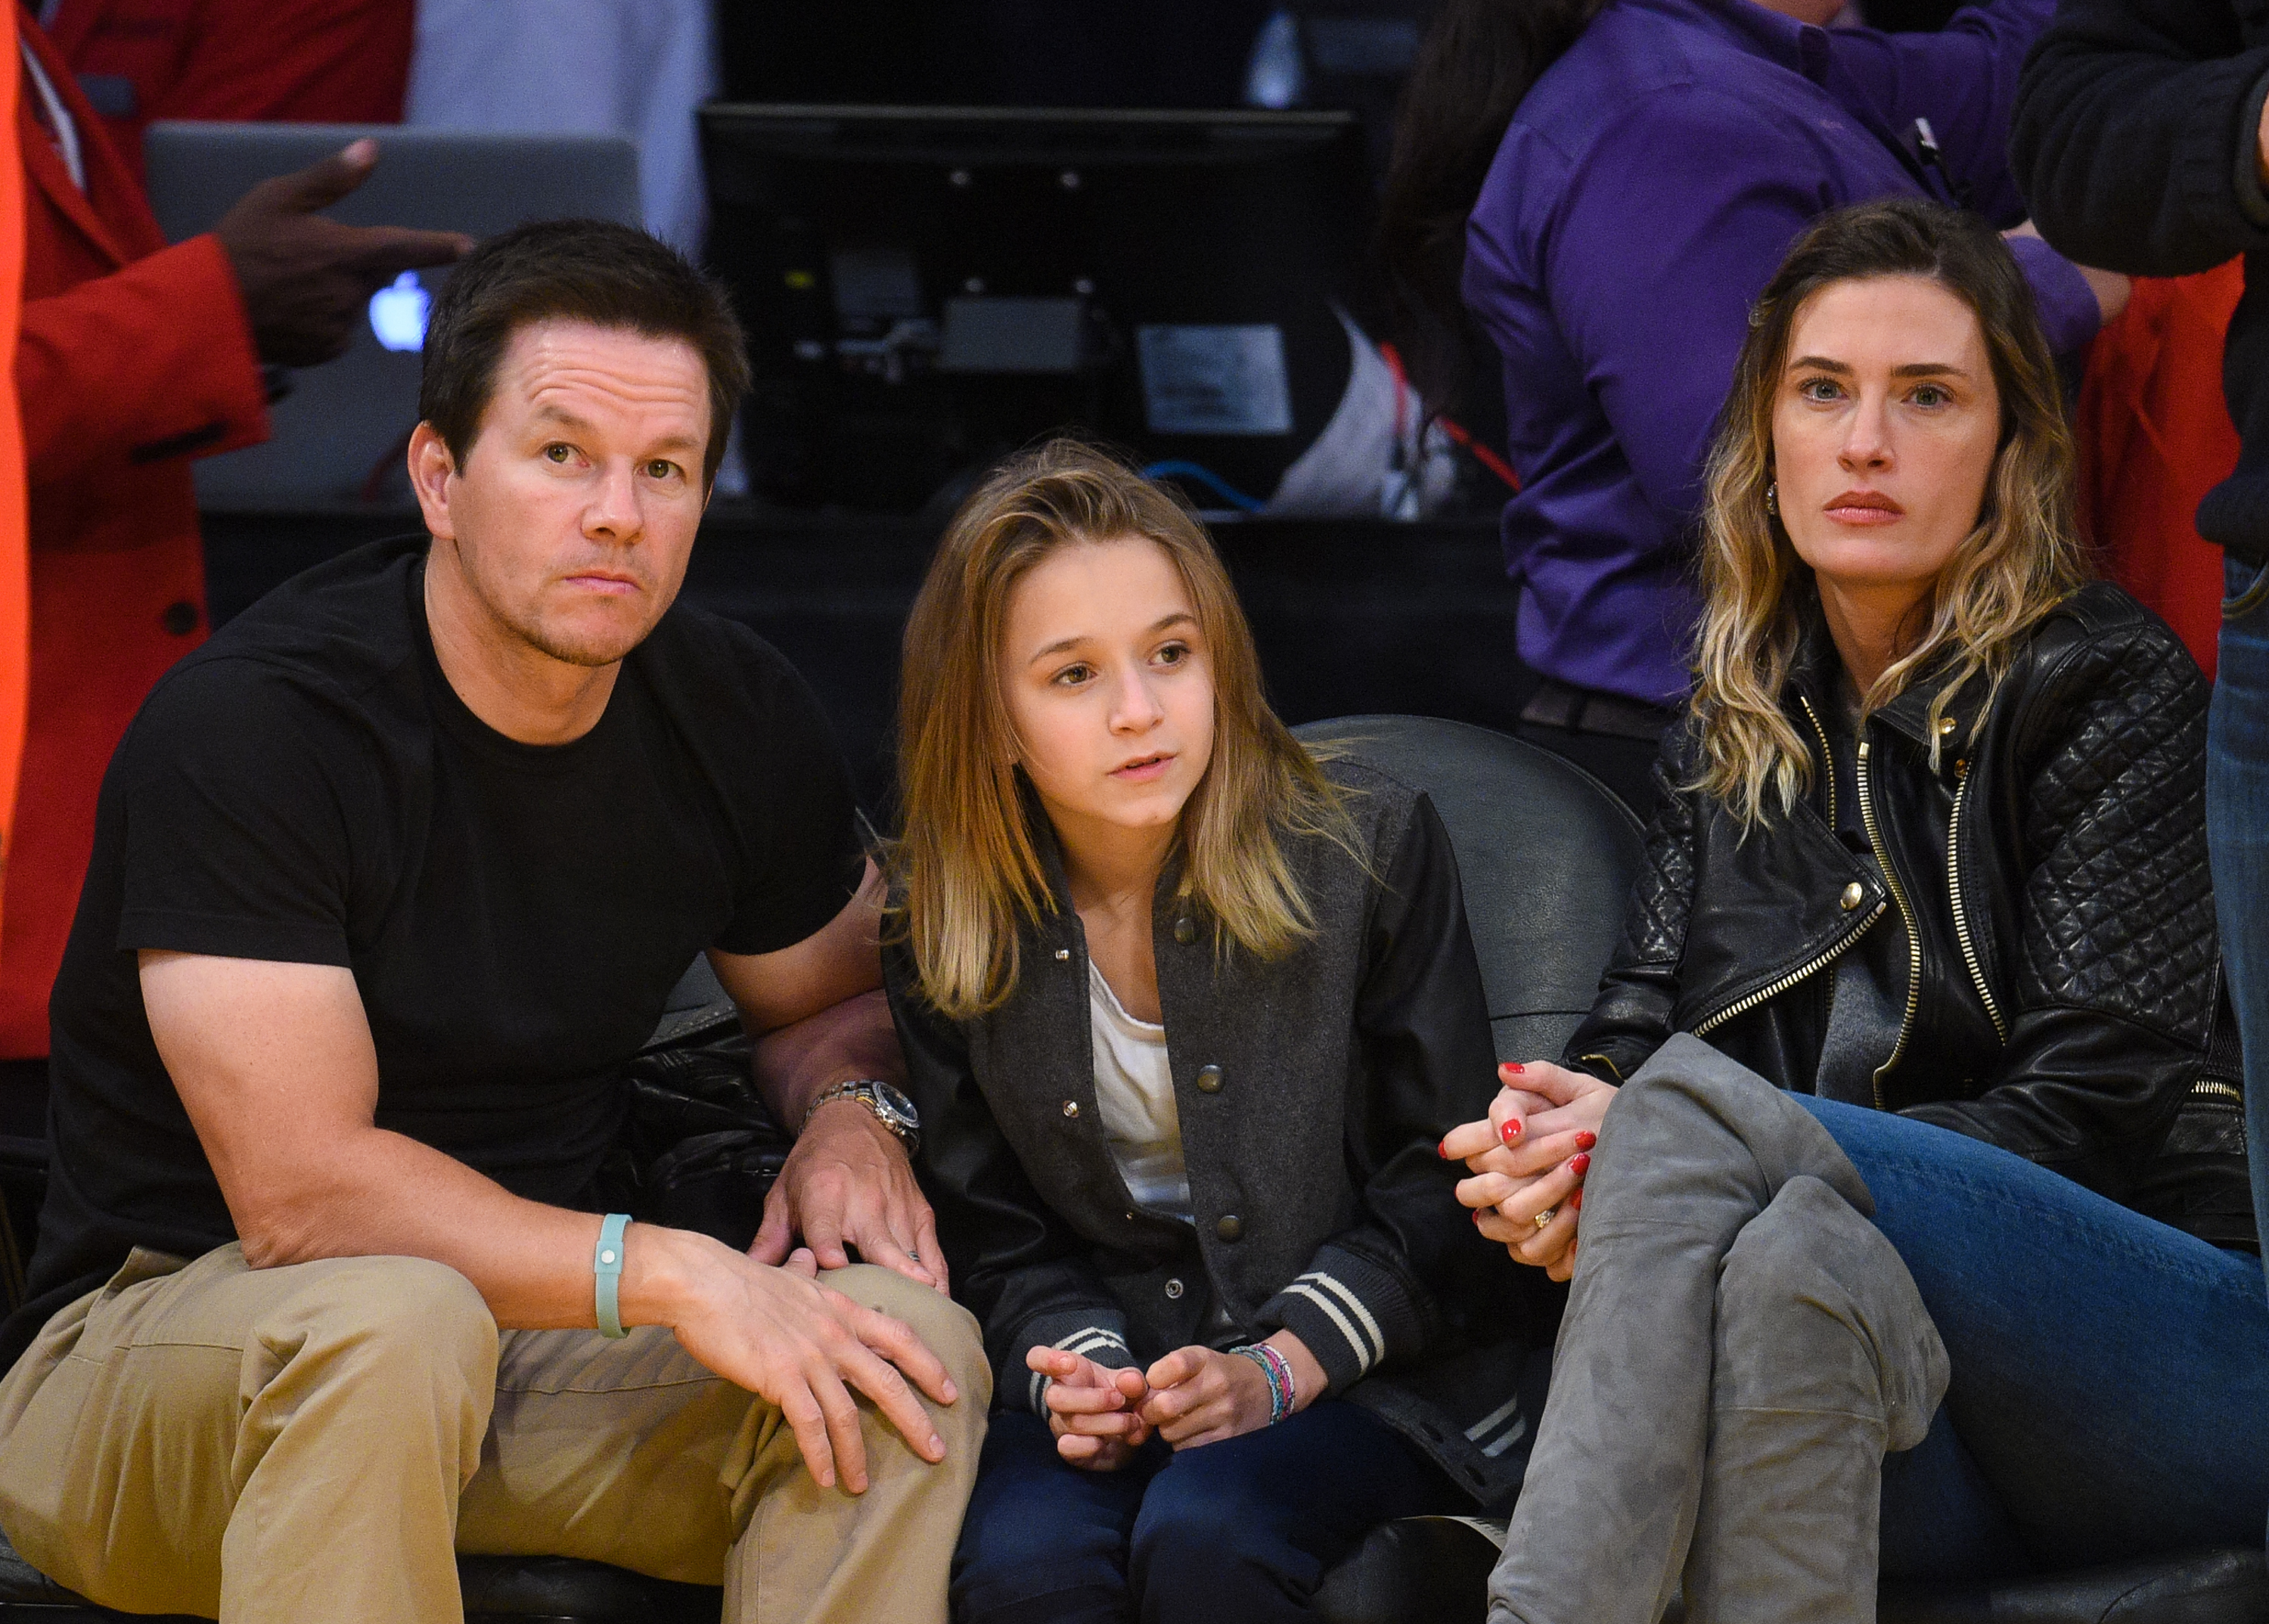 Mark Wahlberg, Ella Rae Wahlberg, and Rhea Durham attend a basketball game in Los Angeles on December 17, 2015. | Source: Getty Images